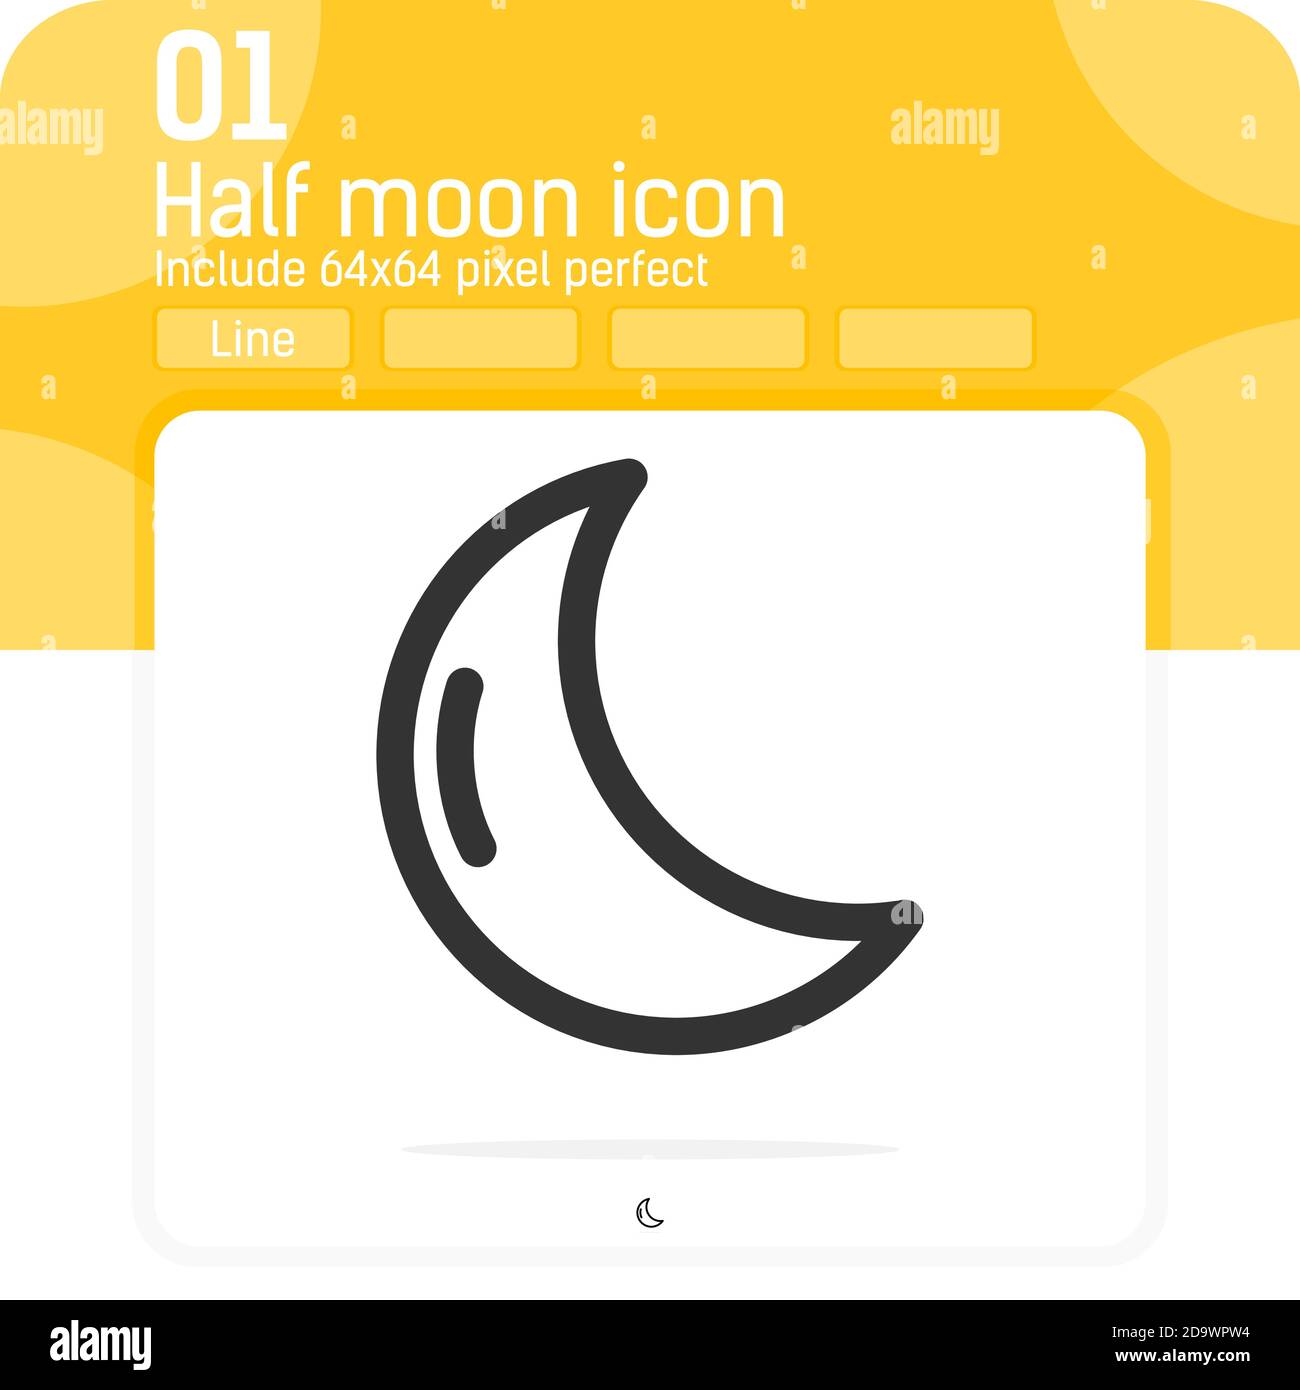 Half moon premium icon with outline style style isolated on white background. line vector illustration sign symbol icon concept for web design, ui, ux Stock Vector